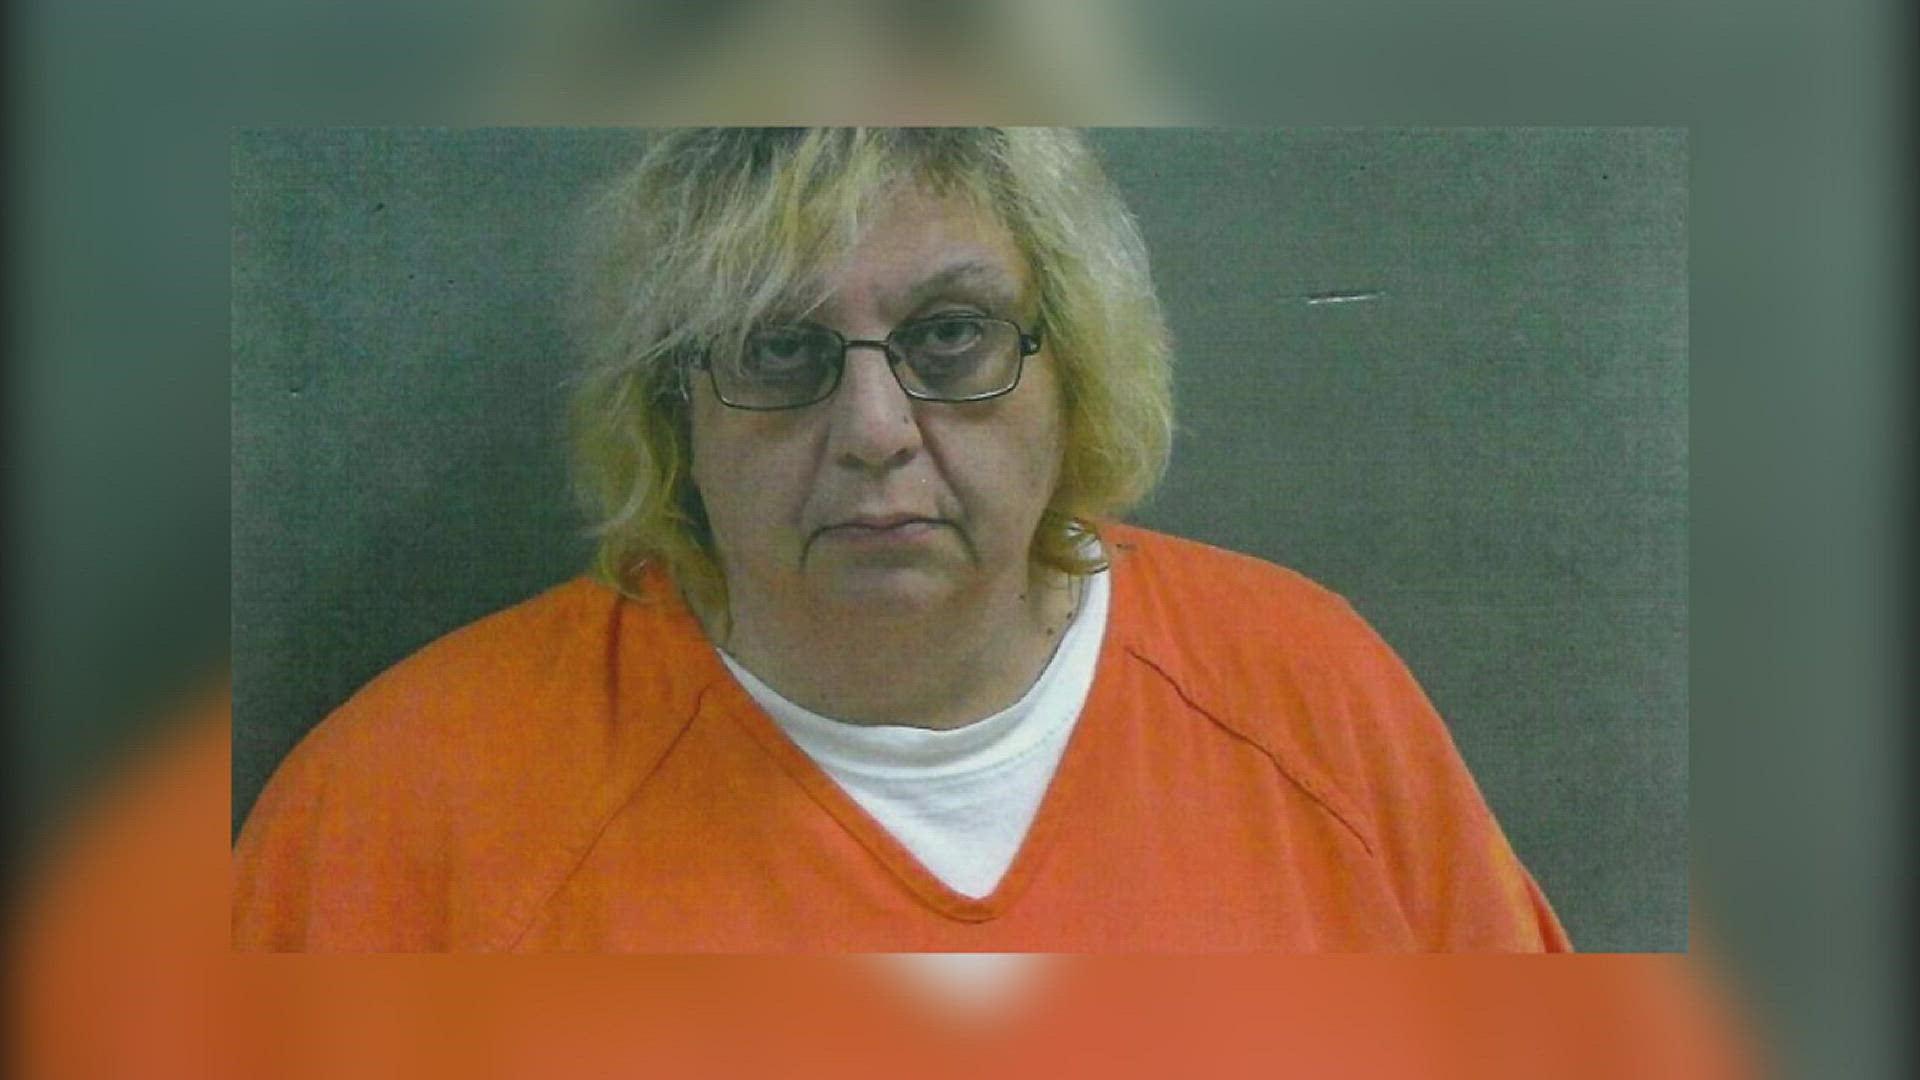 50-year-old Marcy Oglesby, who lives across the street from where the body was found, was arrested and charged with concealment of death.